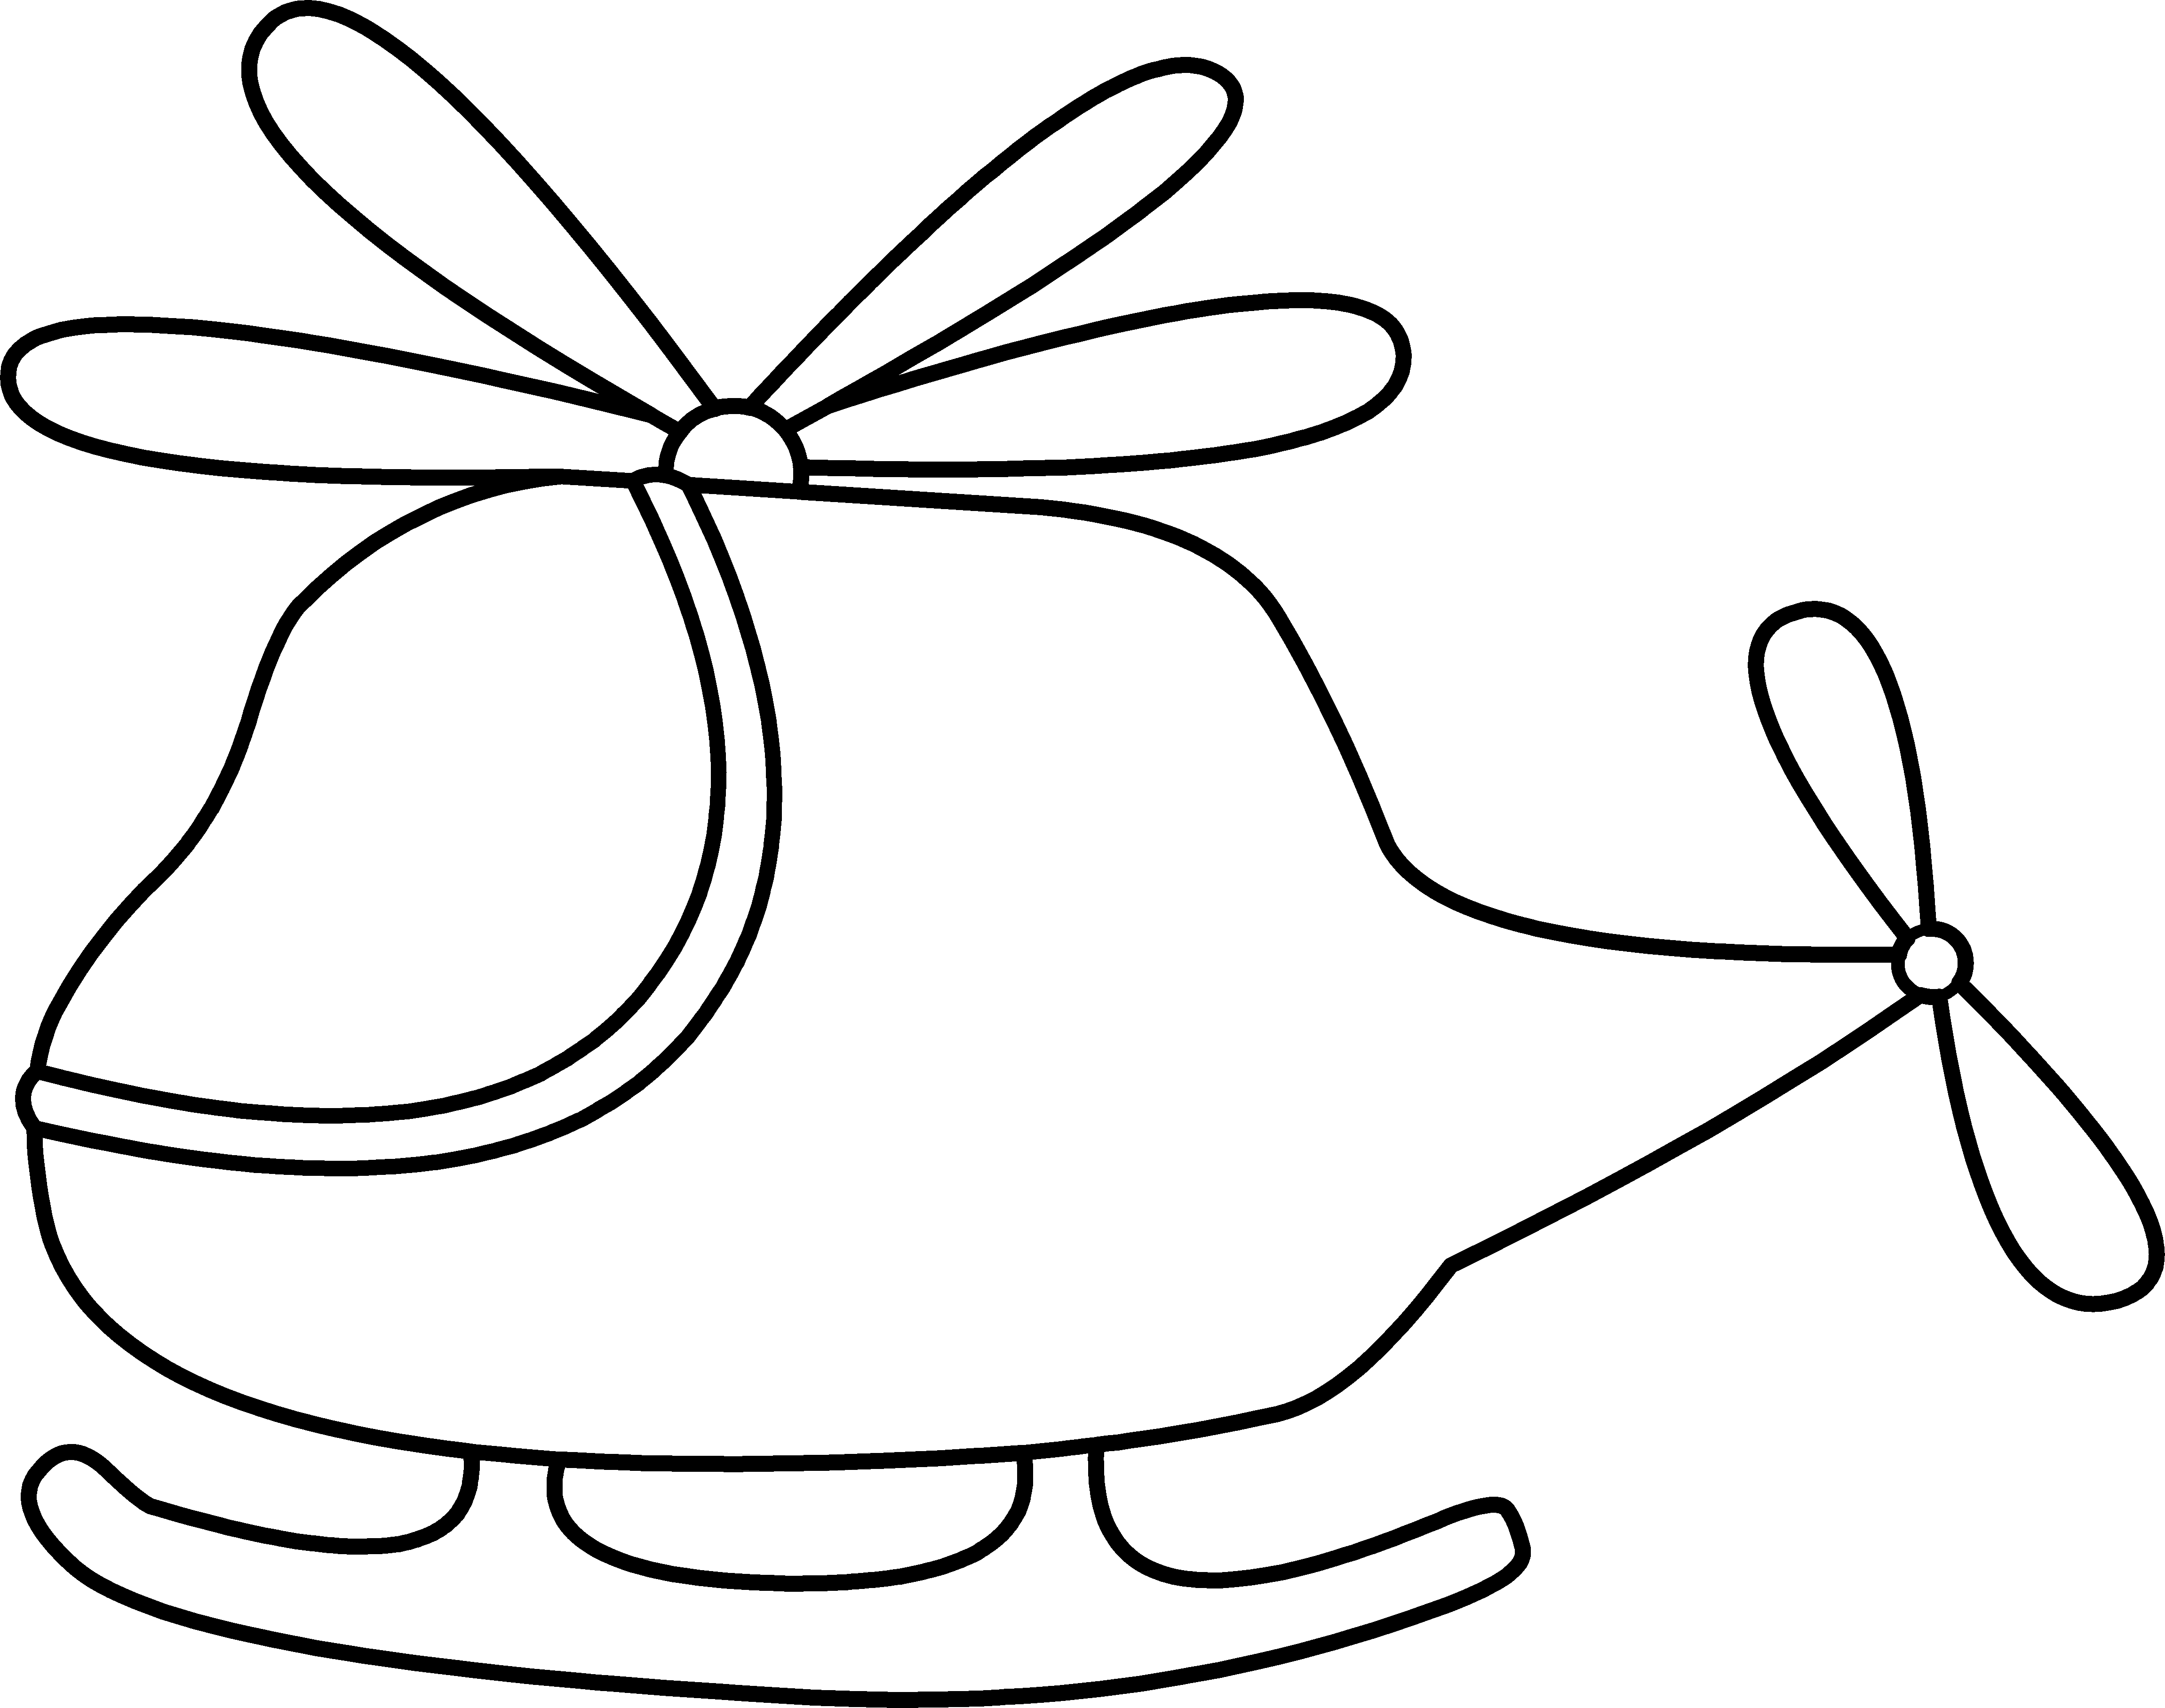 Helicopter Clipart Black And White - Free Clipart ...